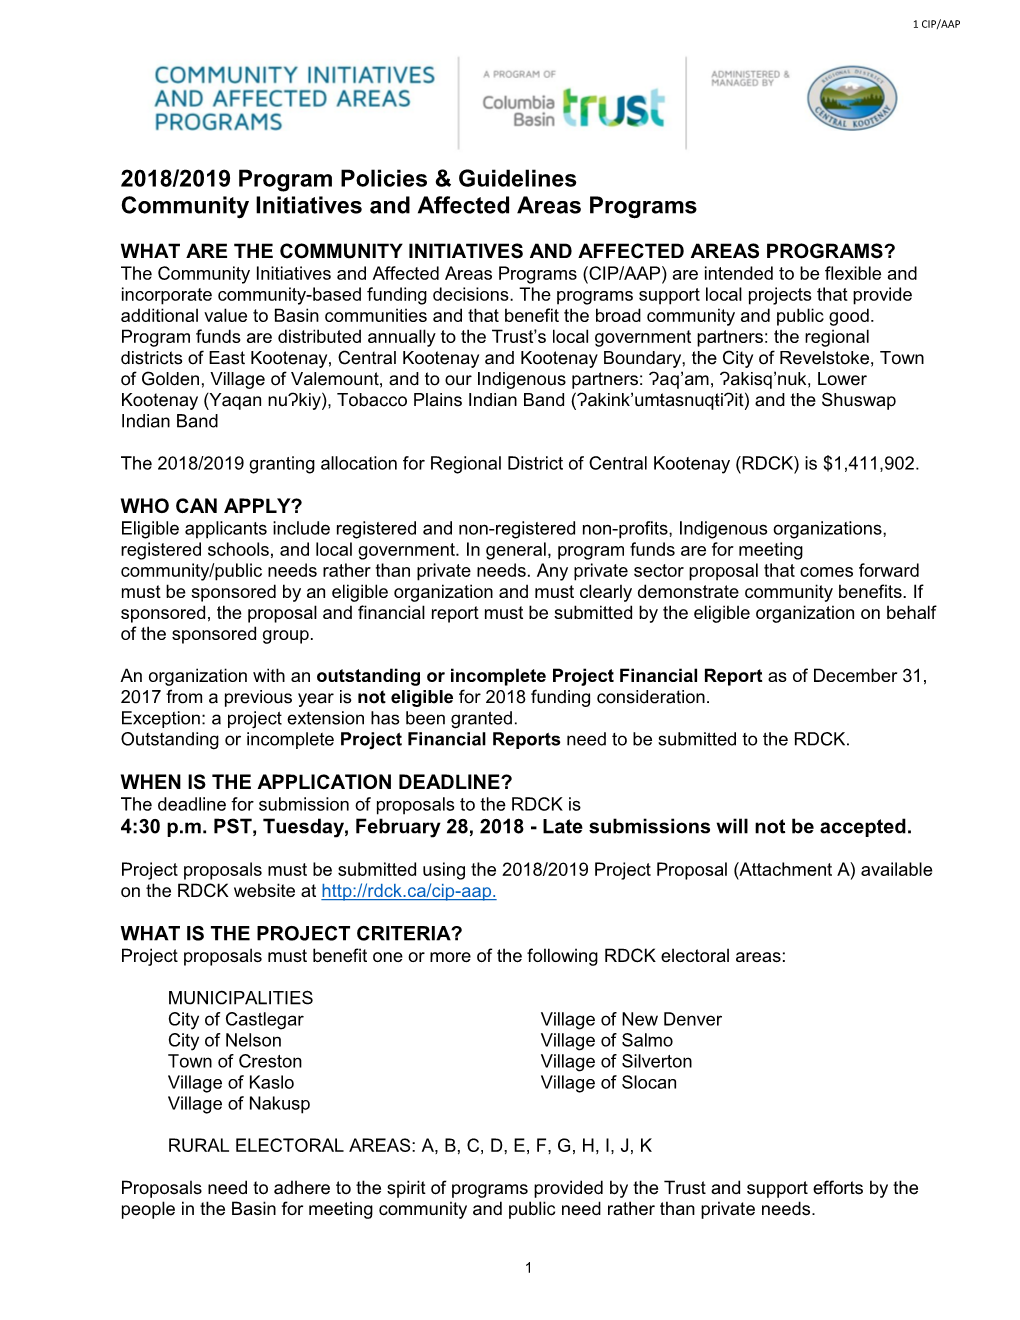 2018/2019 Program Policies & Guidelines Community Initiatives